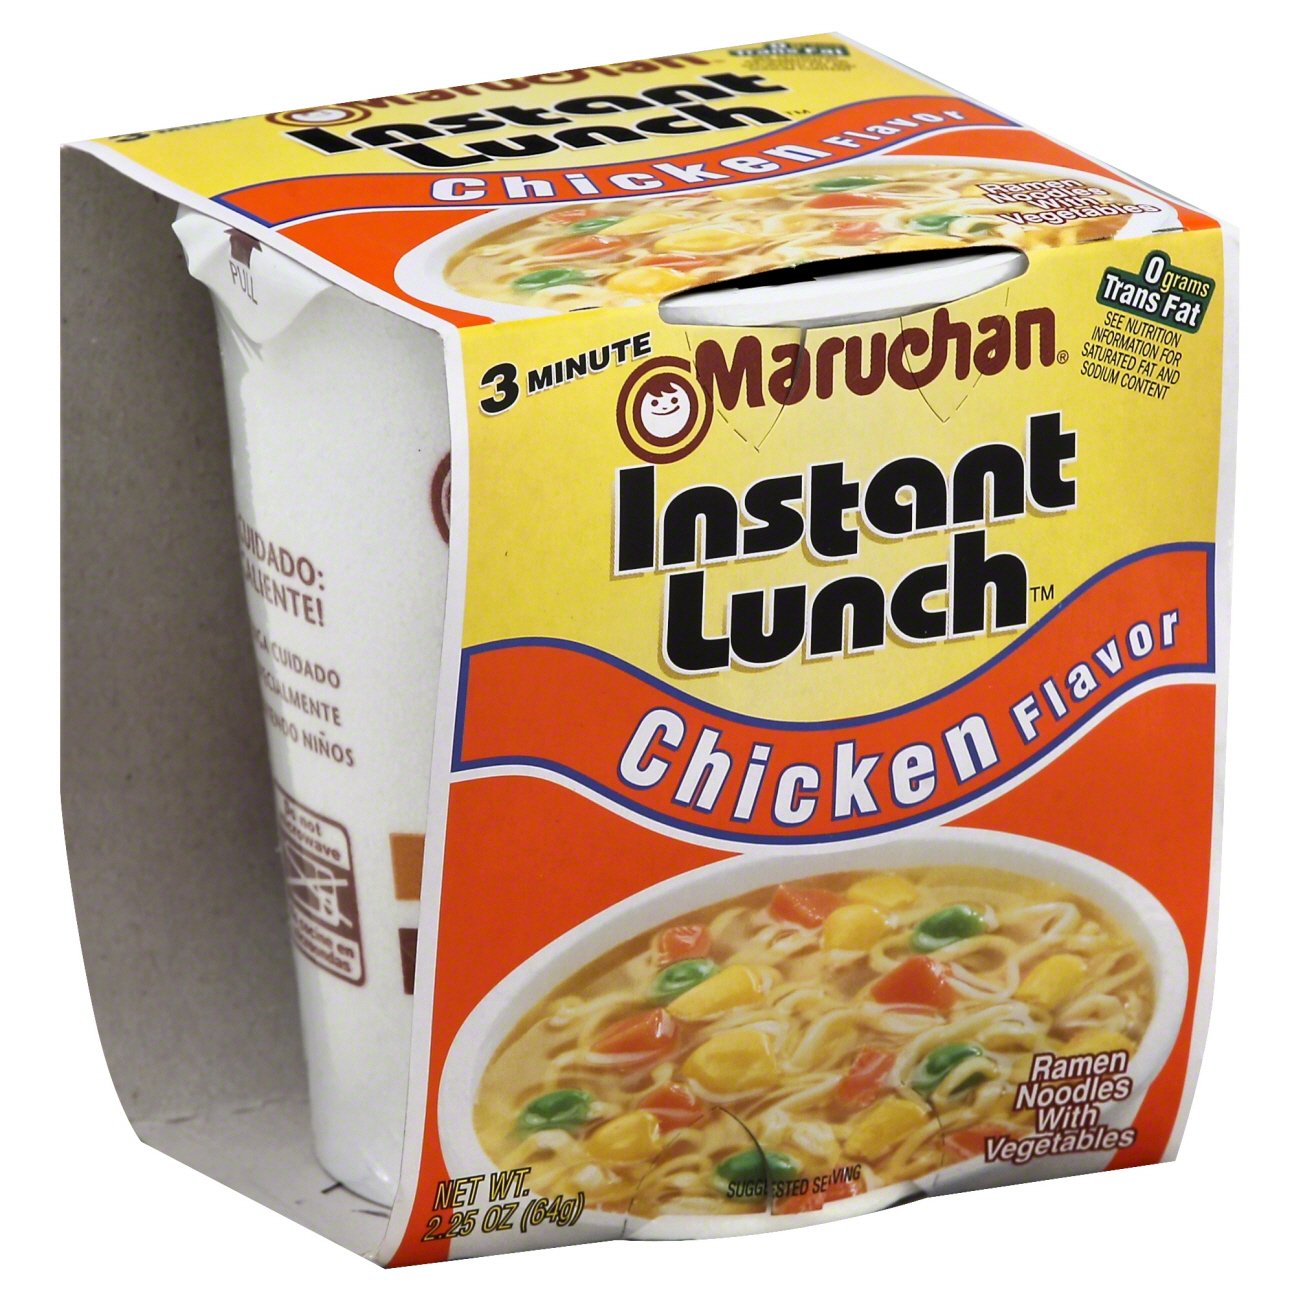 Maruchan Instant Lunch Chicken Flavor - Shop Soups & Chili at H-E-B